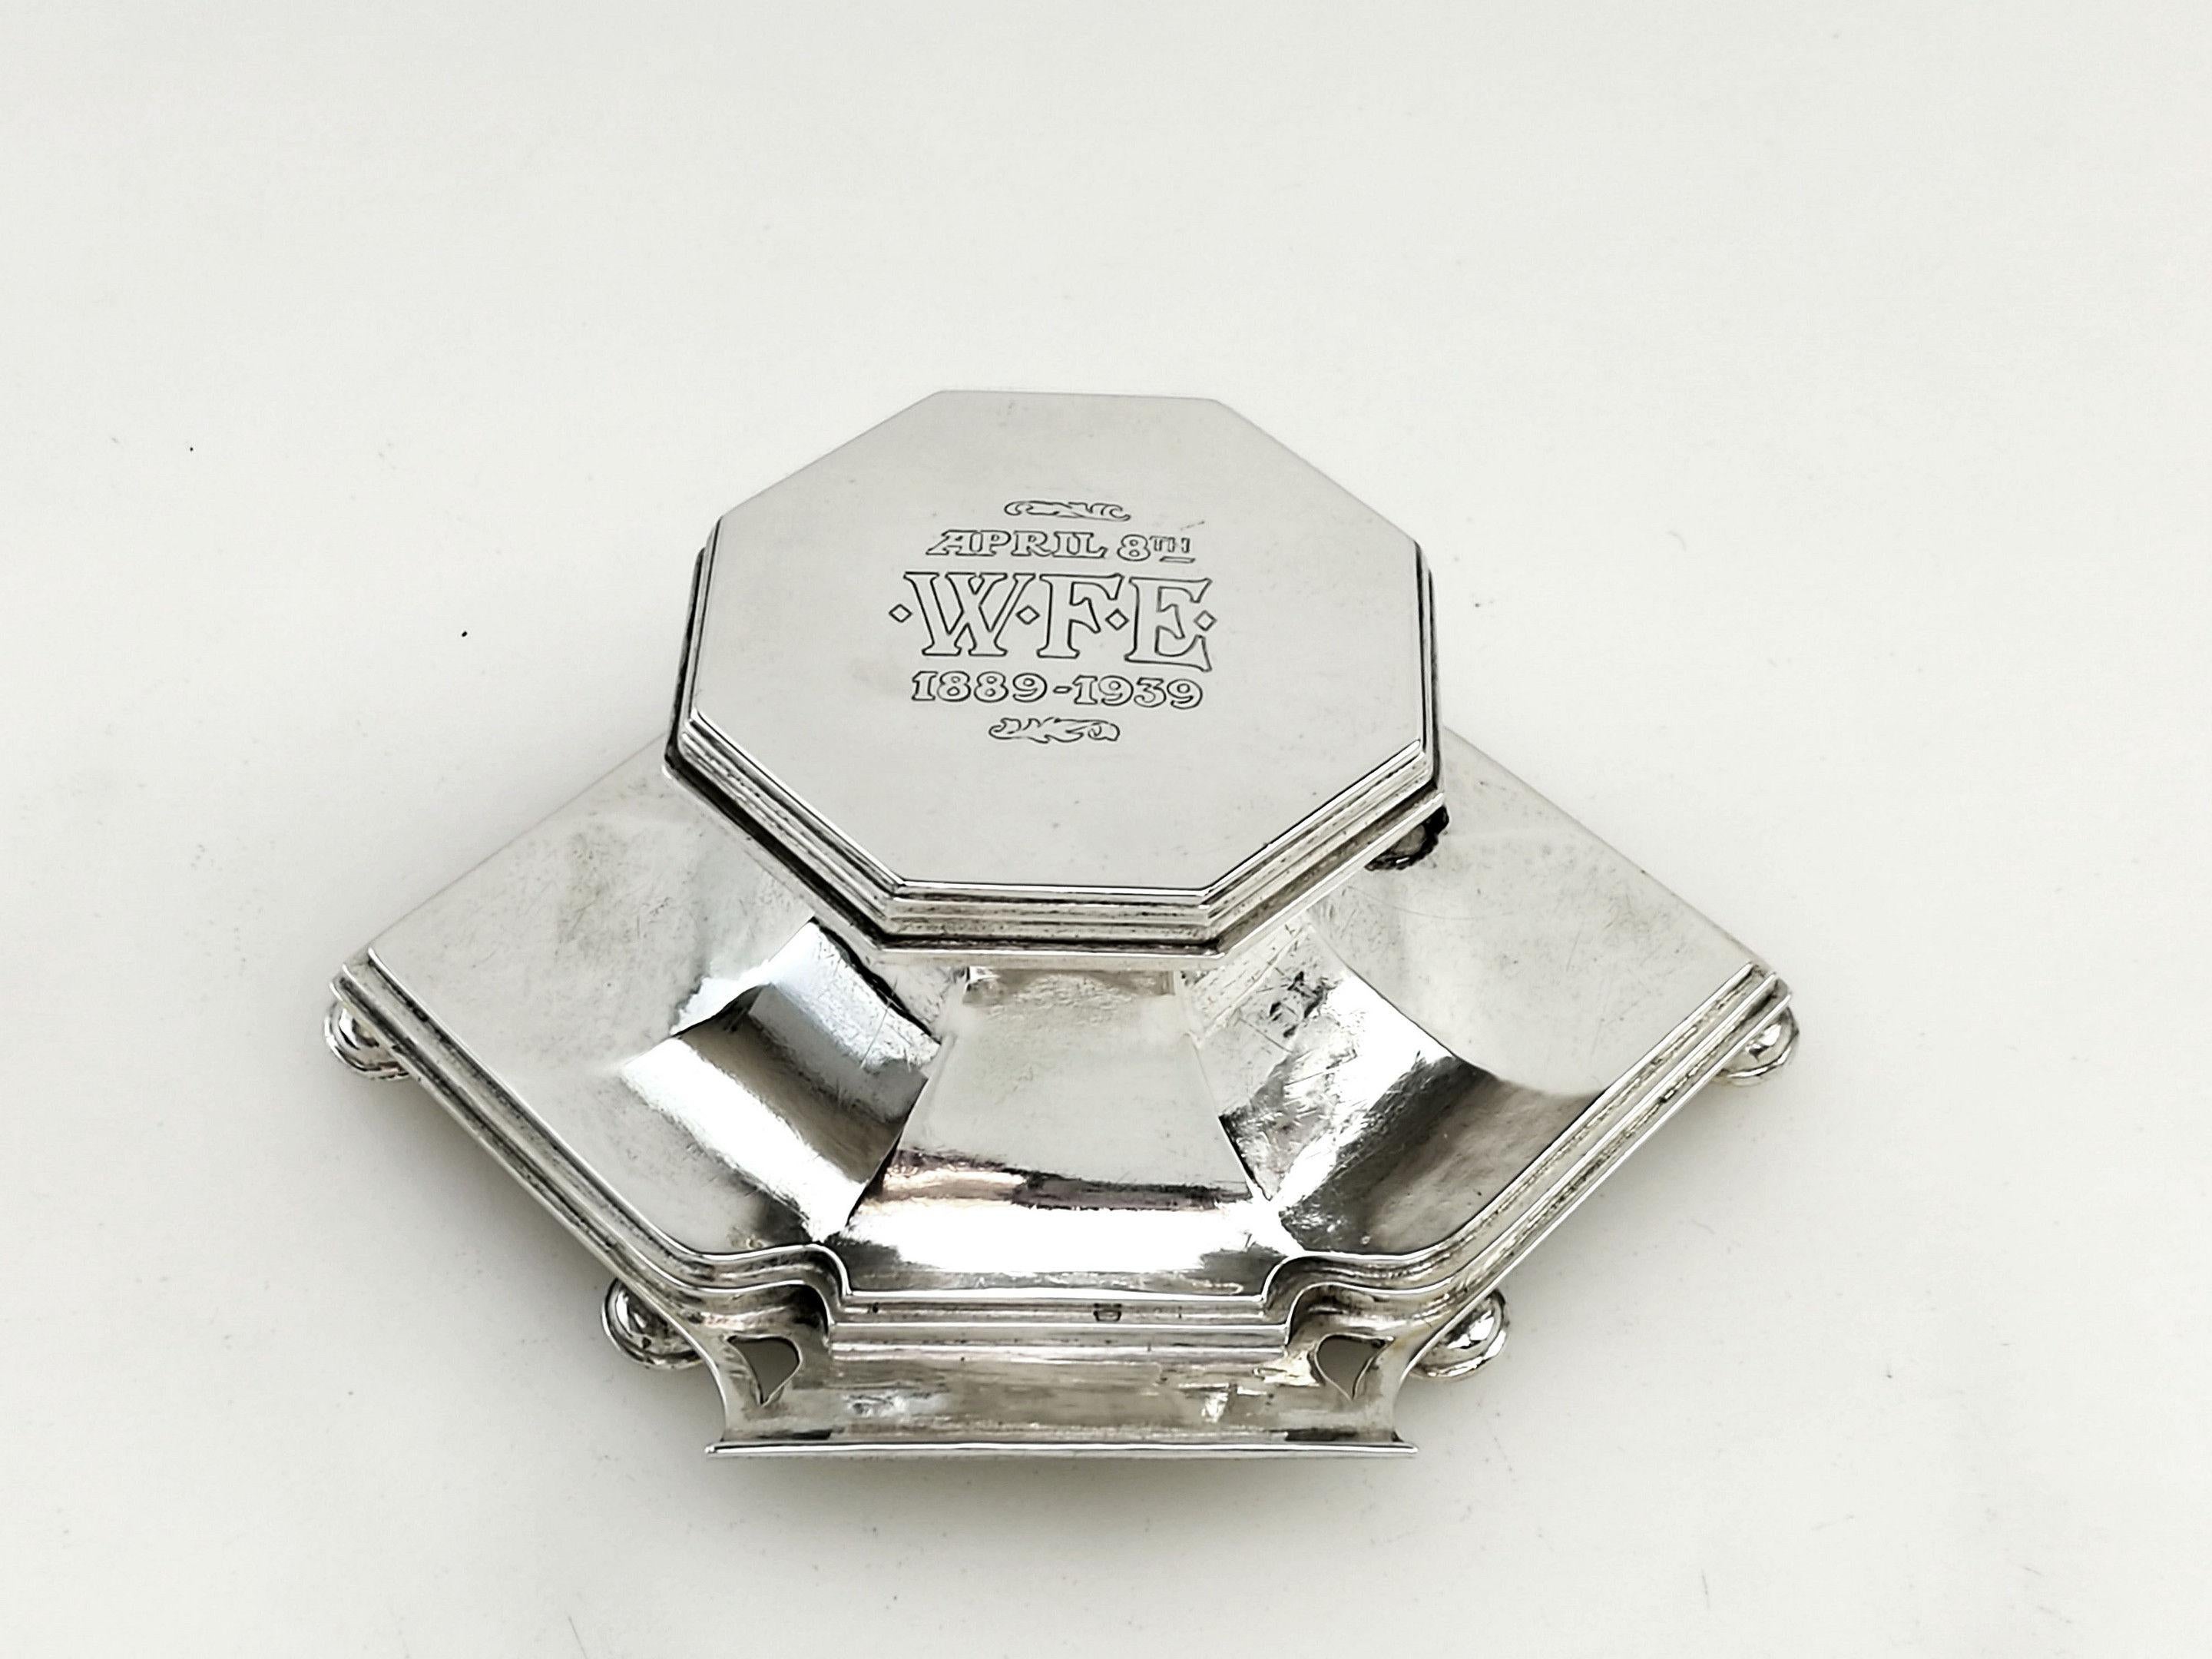 A wonderful Arts & Crafts solid silver Inkwell with a hexagonal lid and an elongated hexagonal base. The base stands on 6 ball feet and has two pen rests, on in the front and one at the back. The base curves up to the rim in elegant panels and the